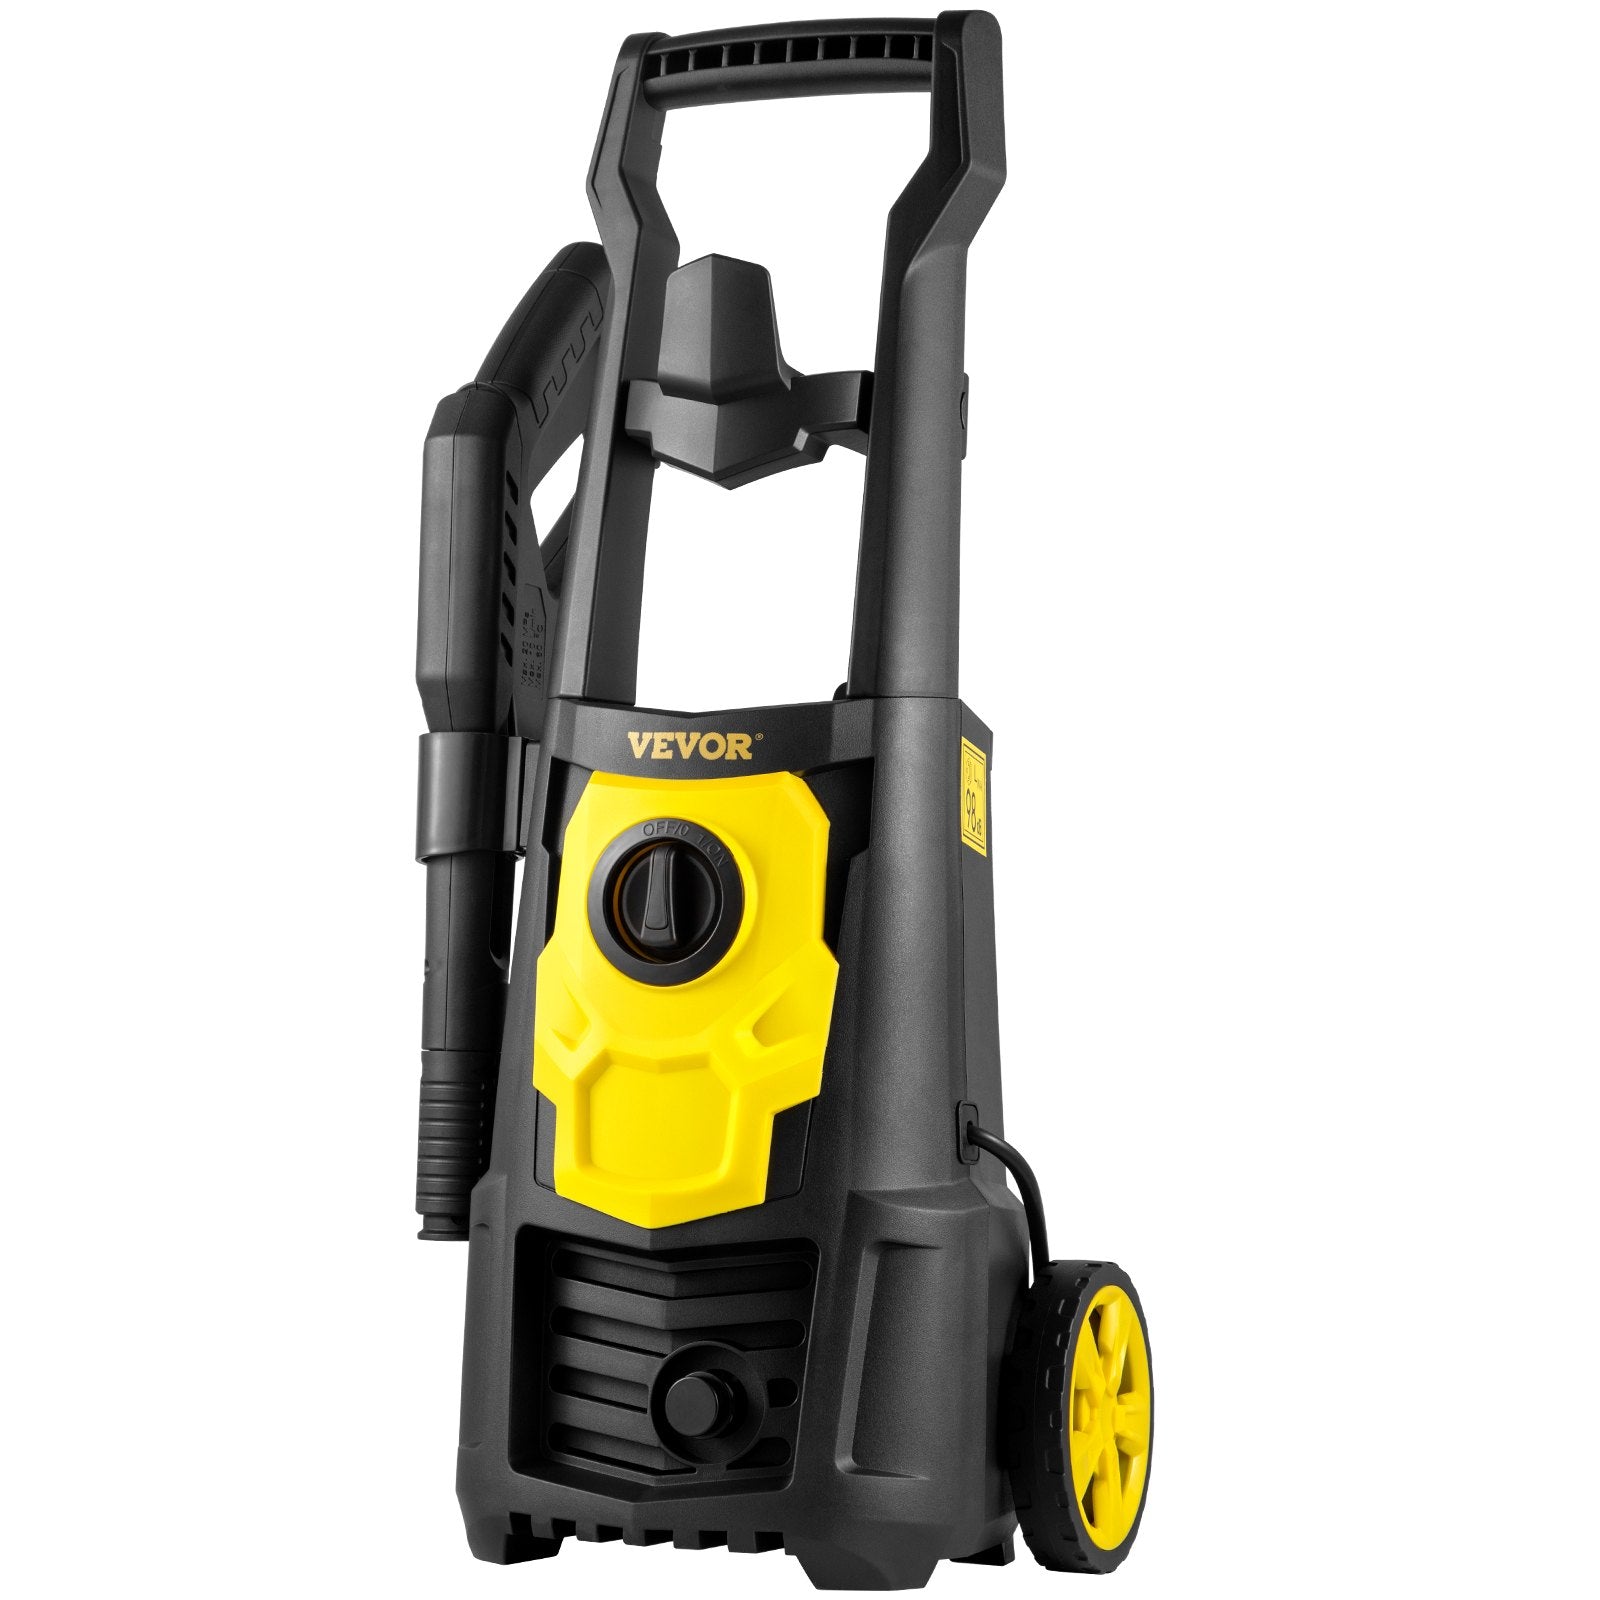 VEVOR Electric Pressure Washer, 2000 PSI, Max. 1.76 GPM Power Washer w/ 30 ft Hose, 5 Quick Connect Nozzles, Foam Cannon, Portable to Clean Patios, Cars, Fences, Driveways, ETL Listed-7